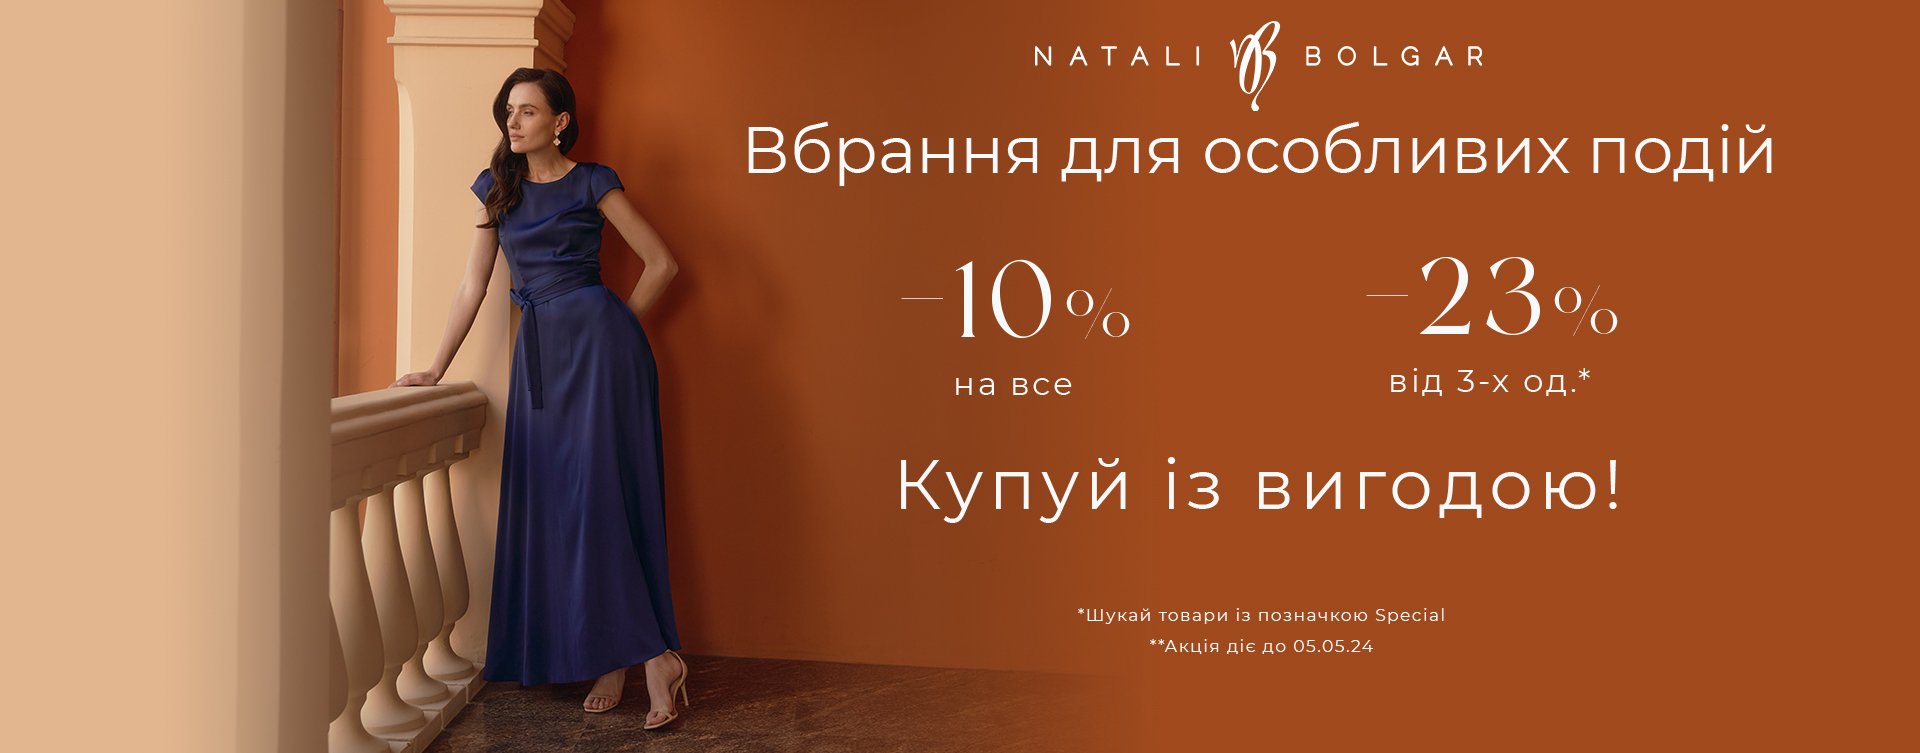 10% or 23% discount from 3 units. in Natali Bolgar